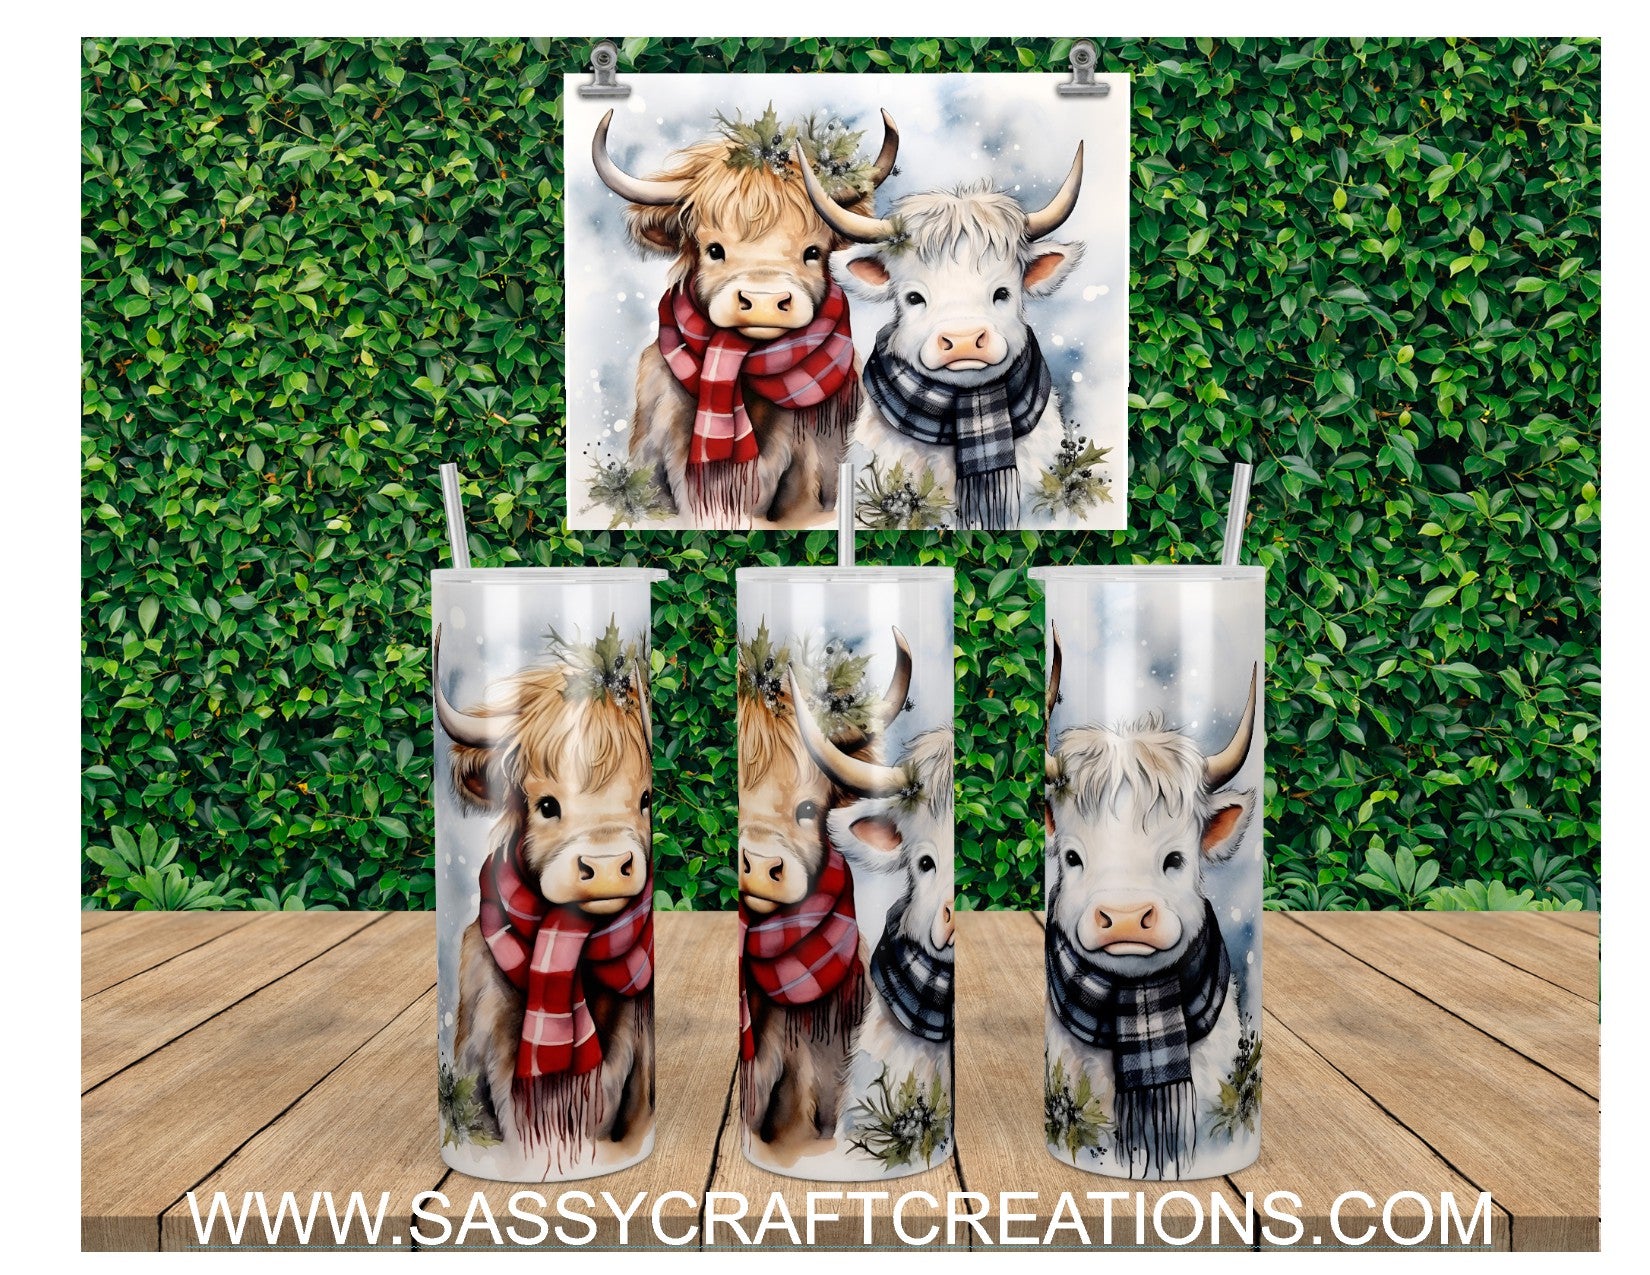 Fall Setting Fluffy Highland Cow 20oz sublimated tumbler with straw & –  Kirby's Custom Creations